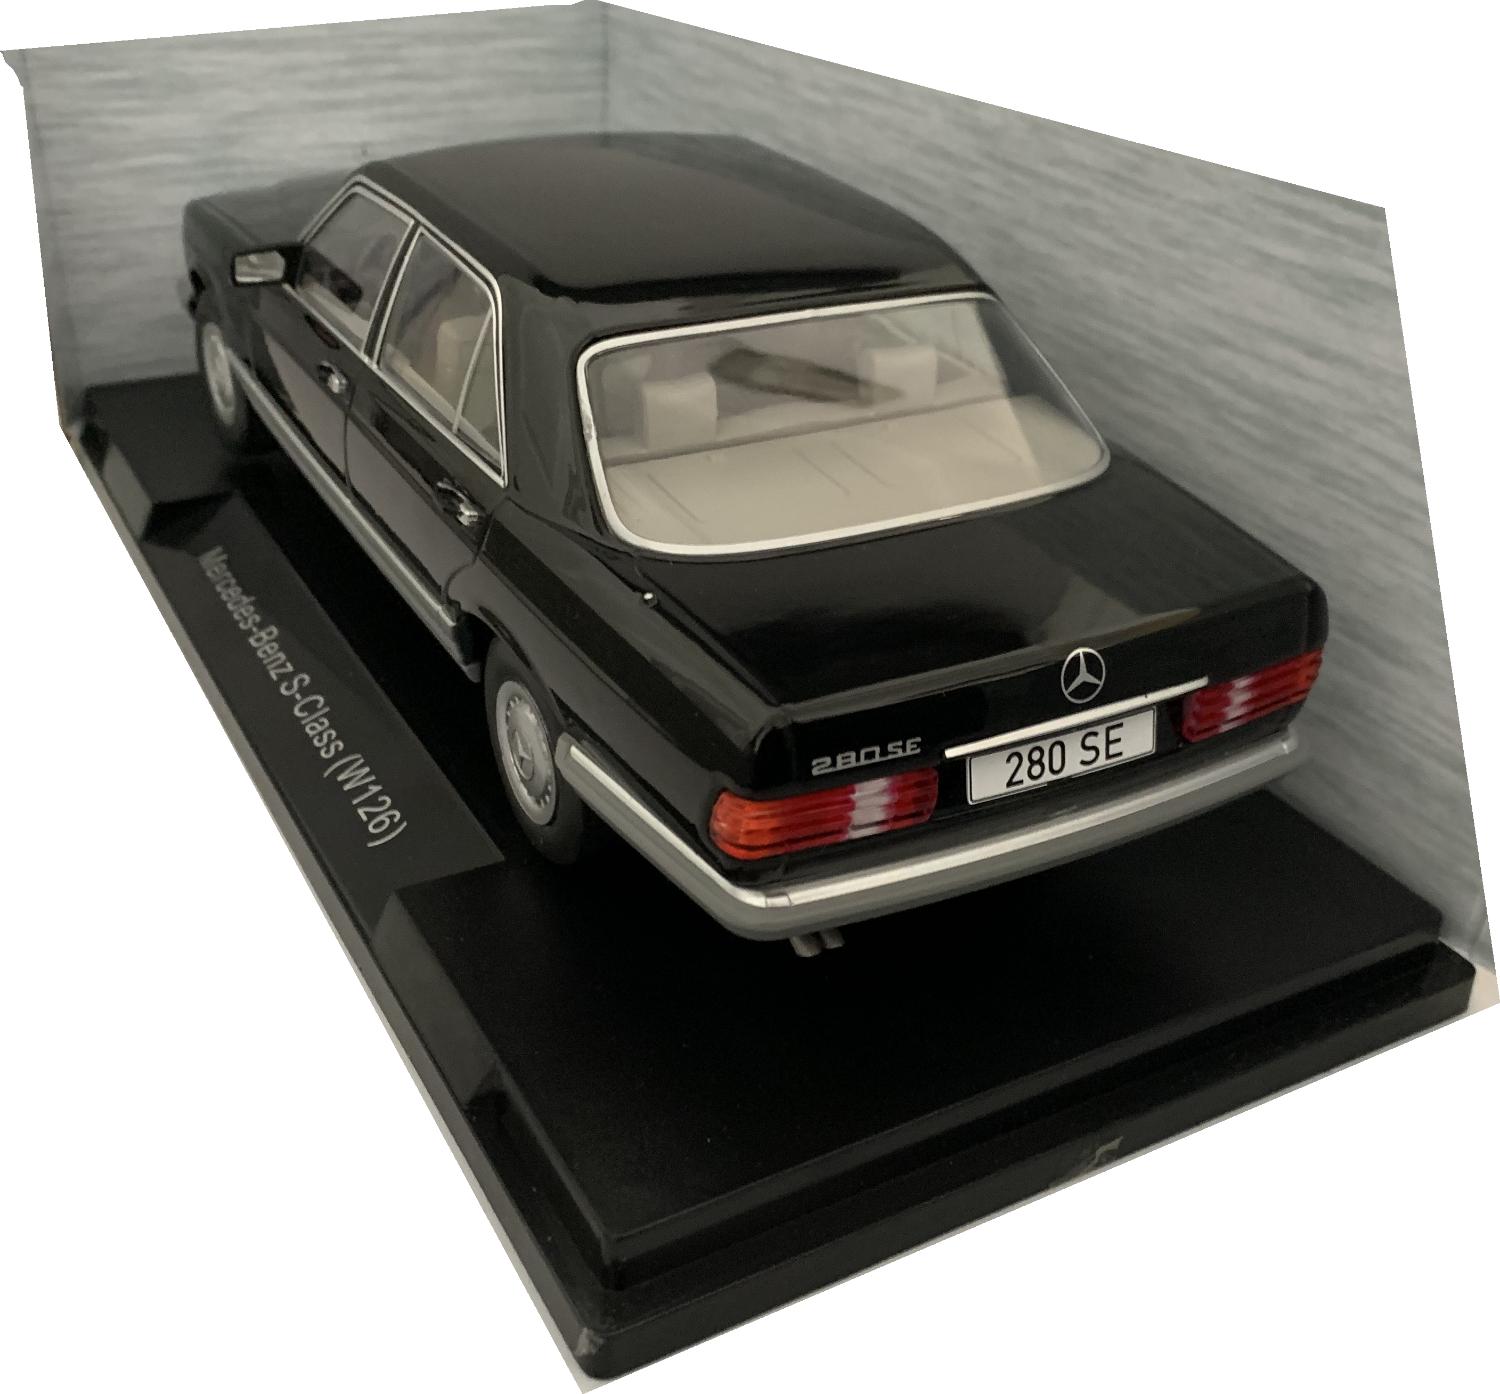 An excellent scale model of the Mercedes Benz S Class with high level of detail throughout, all authentically recreated.